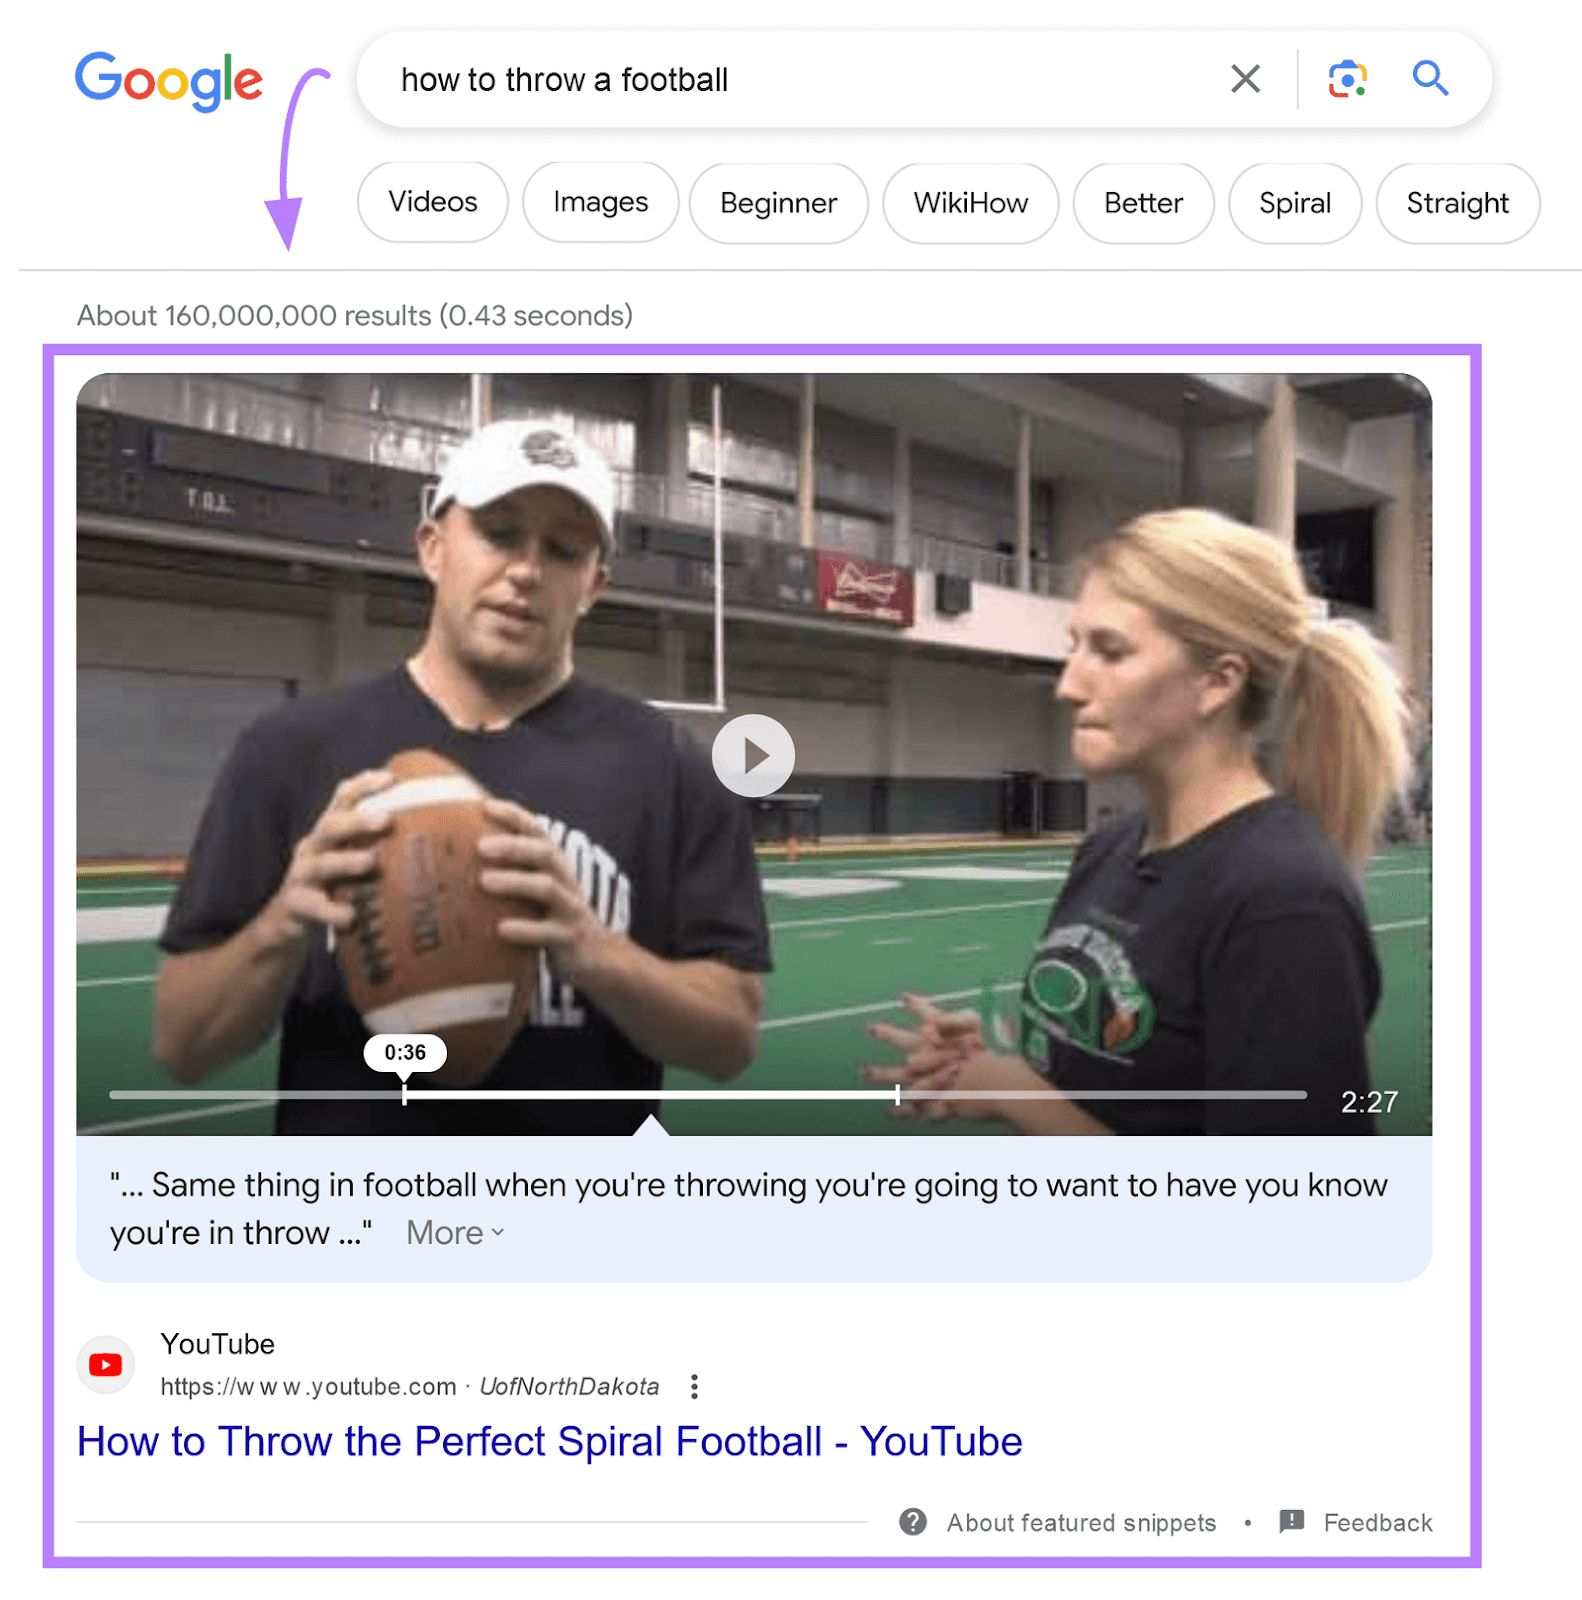 Featured video example on Google SERP for "how to throw a football" search